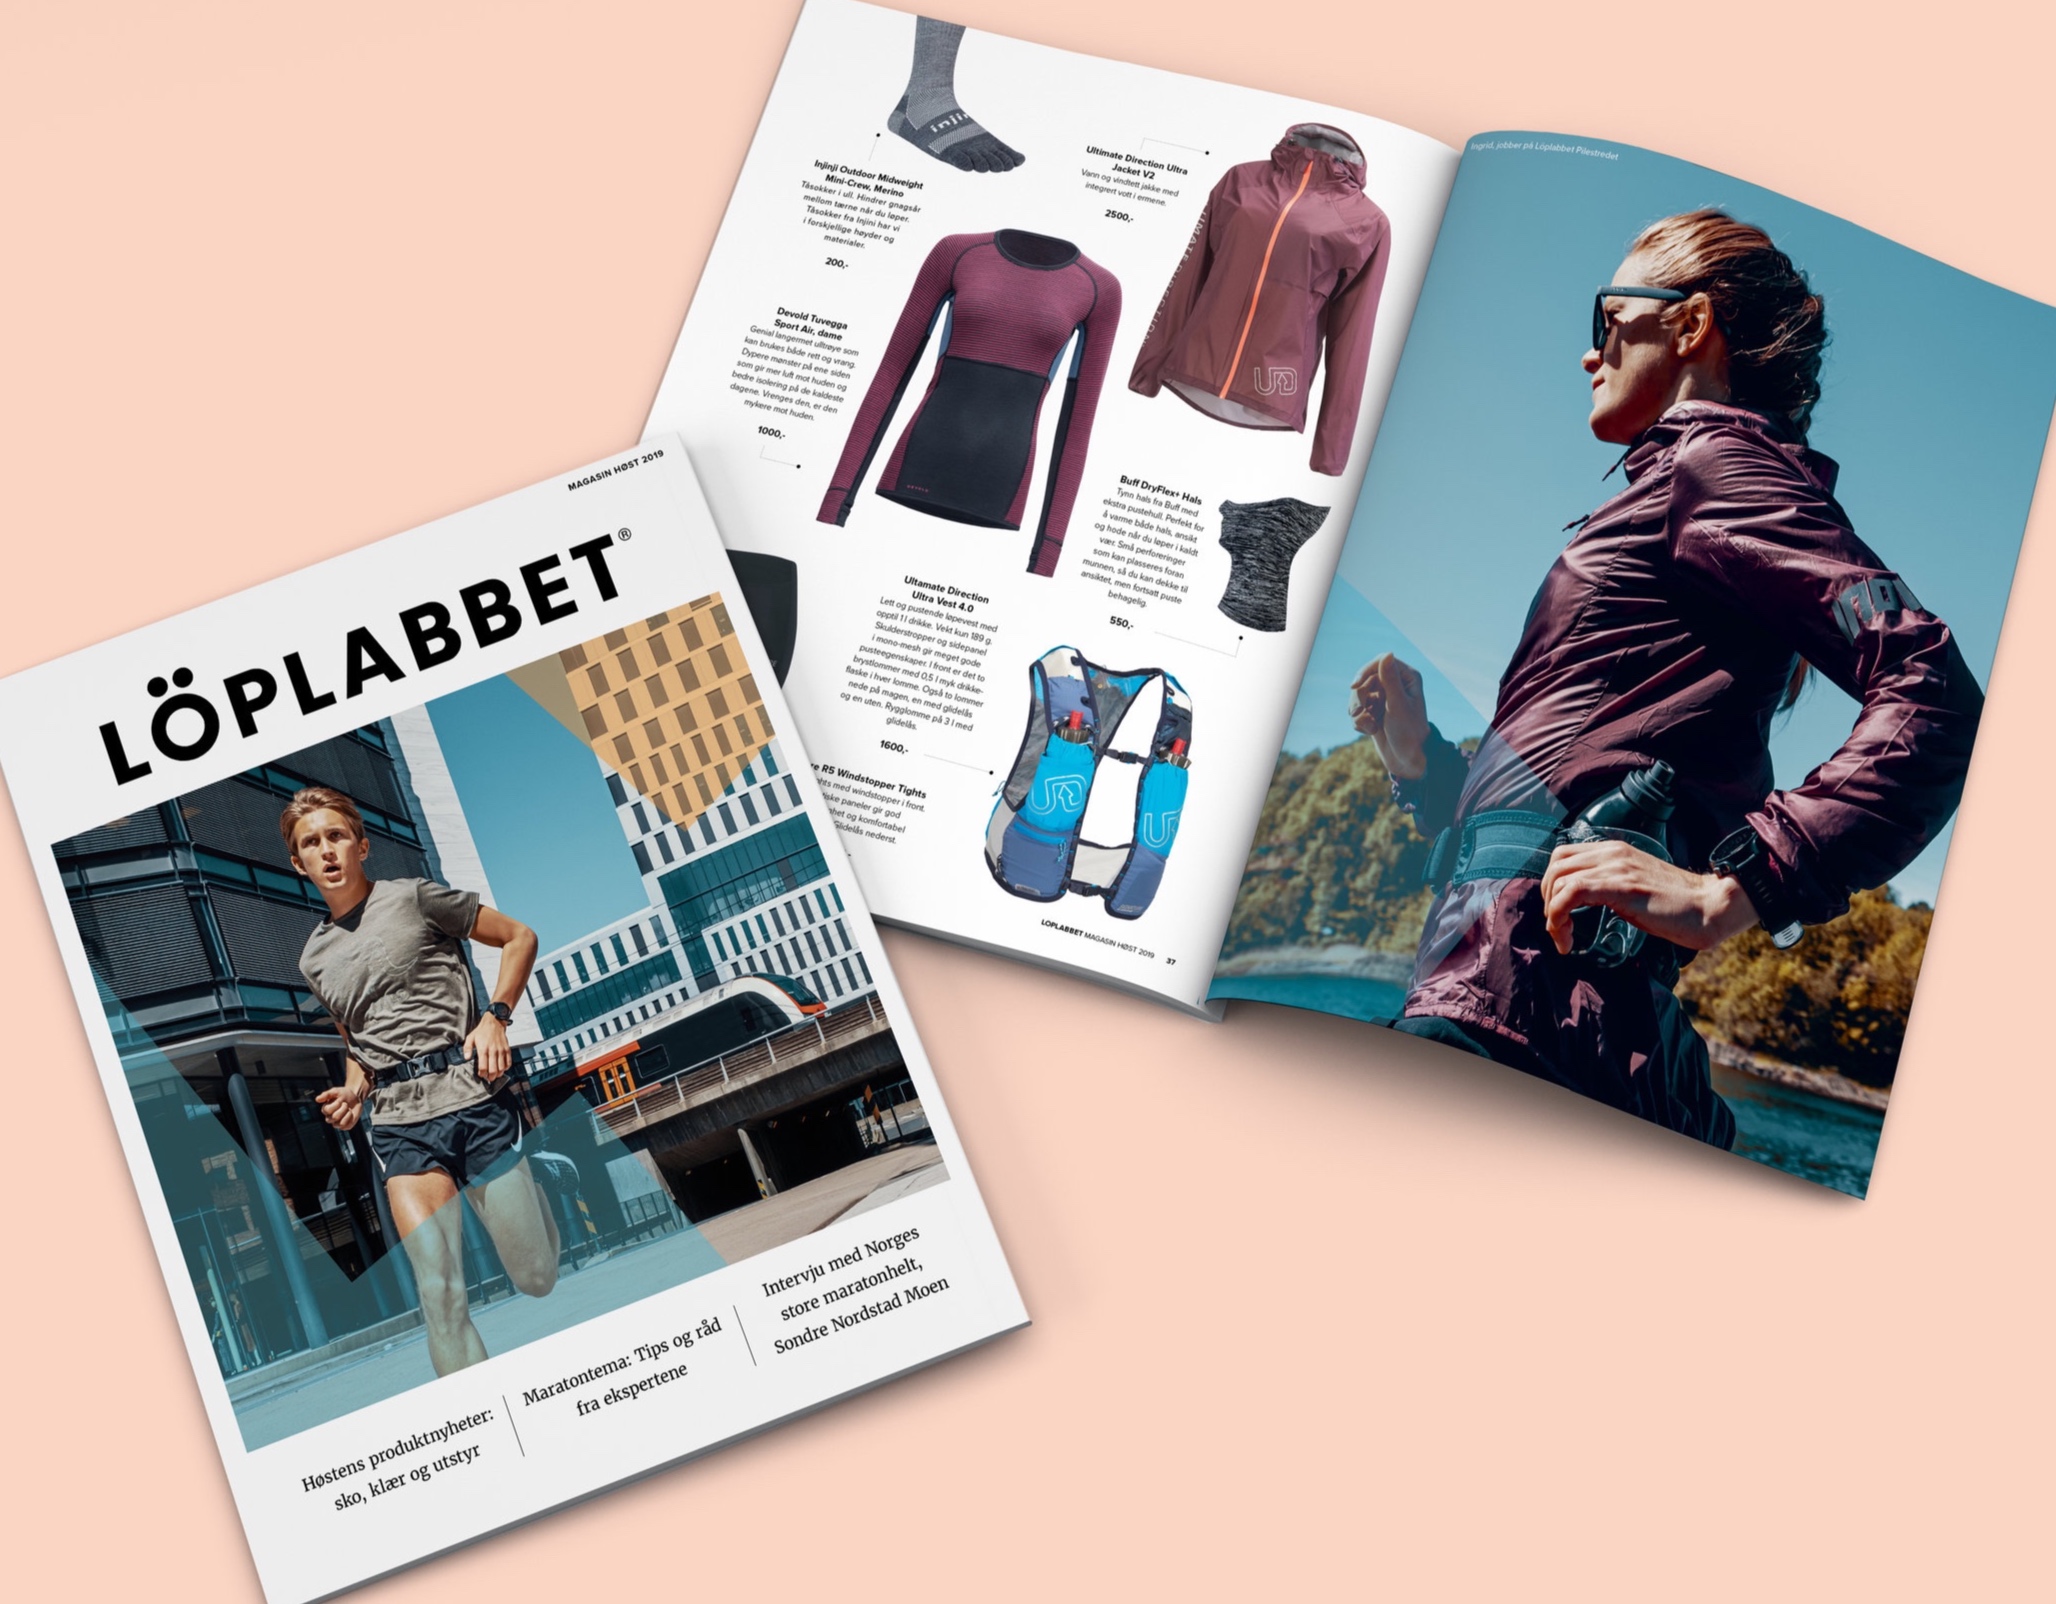  New Löplabbet magazine out now! With stunning photos taken of ByAksel. 